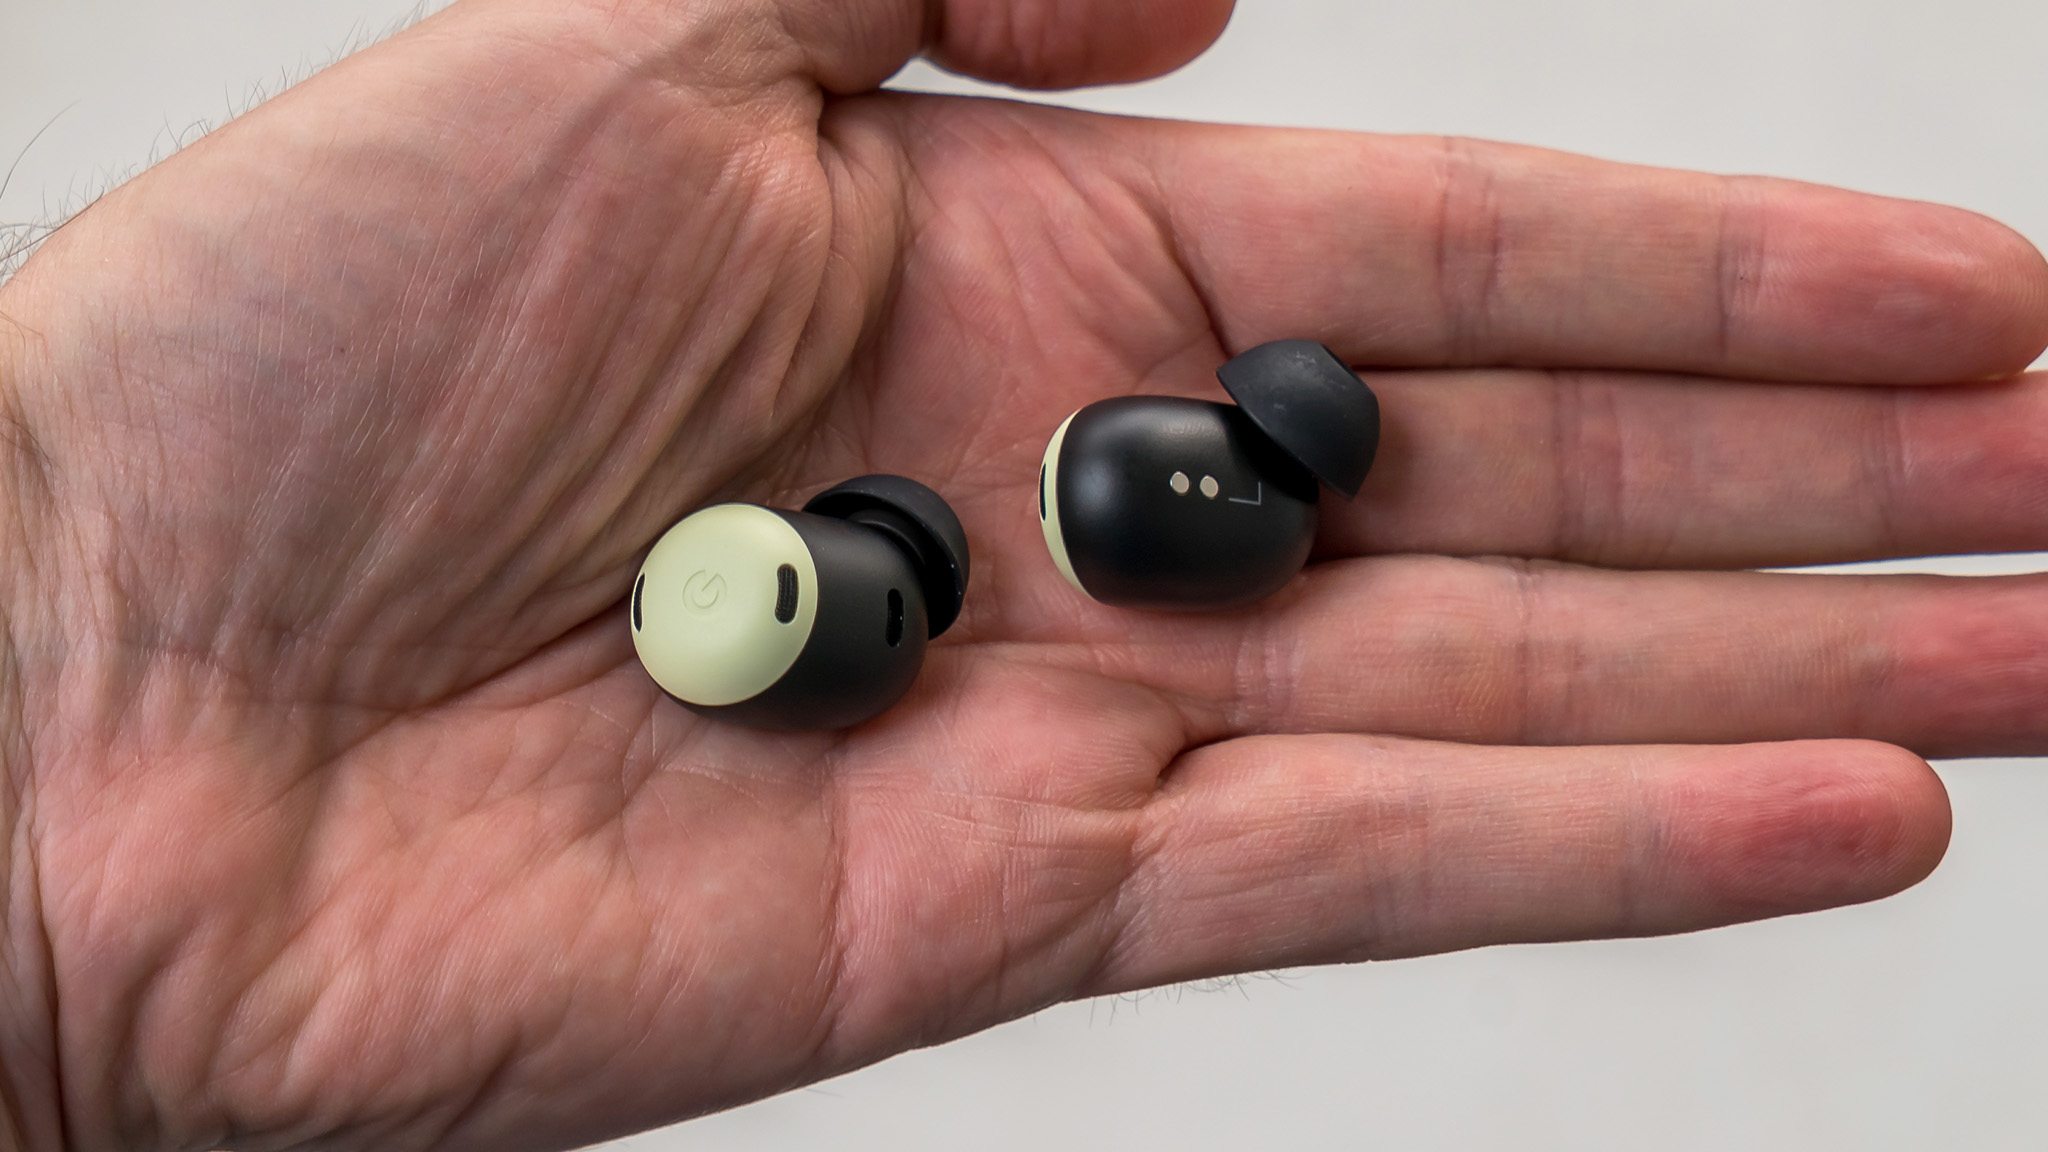 Carry the Google Pixel Buds Pro headphones at hand